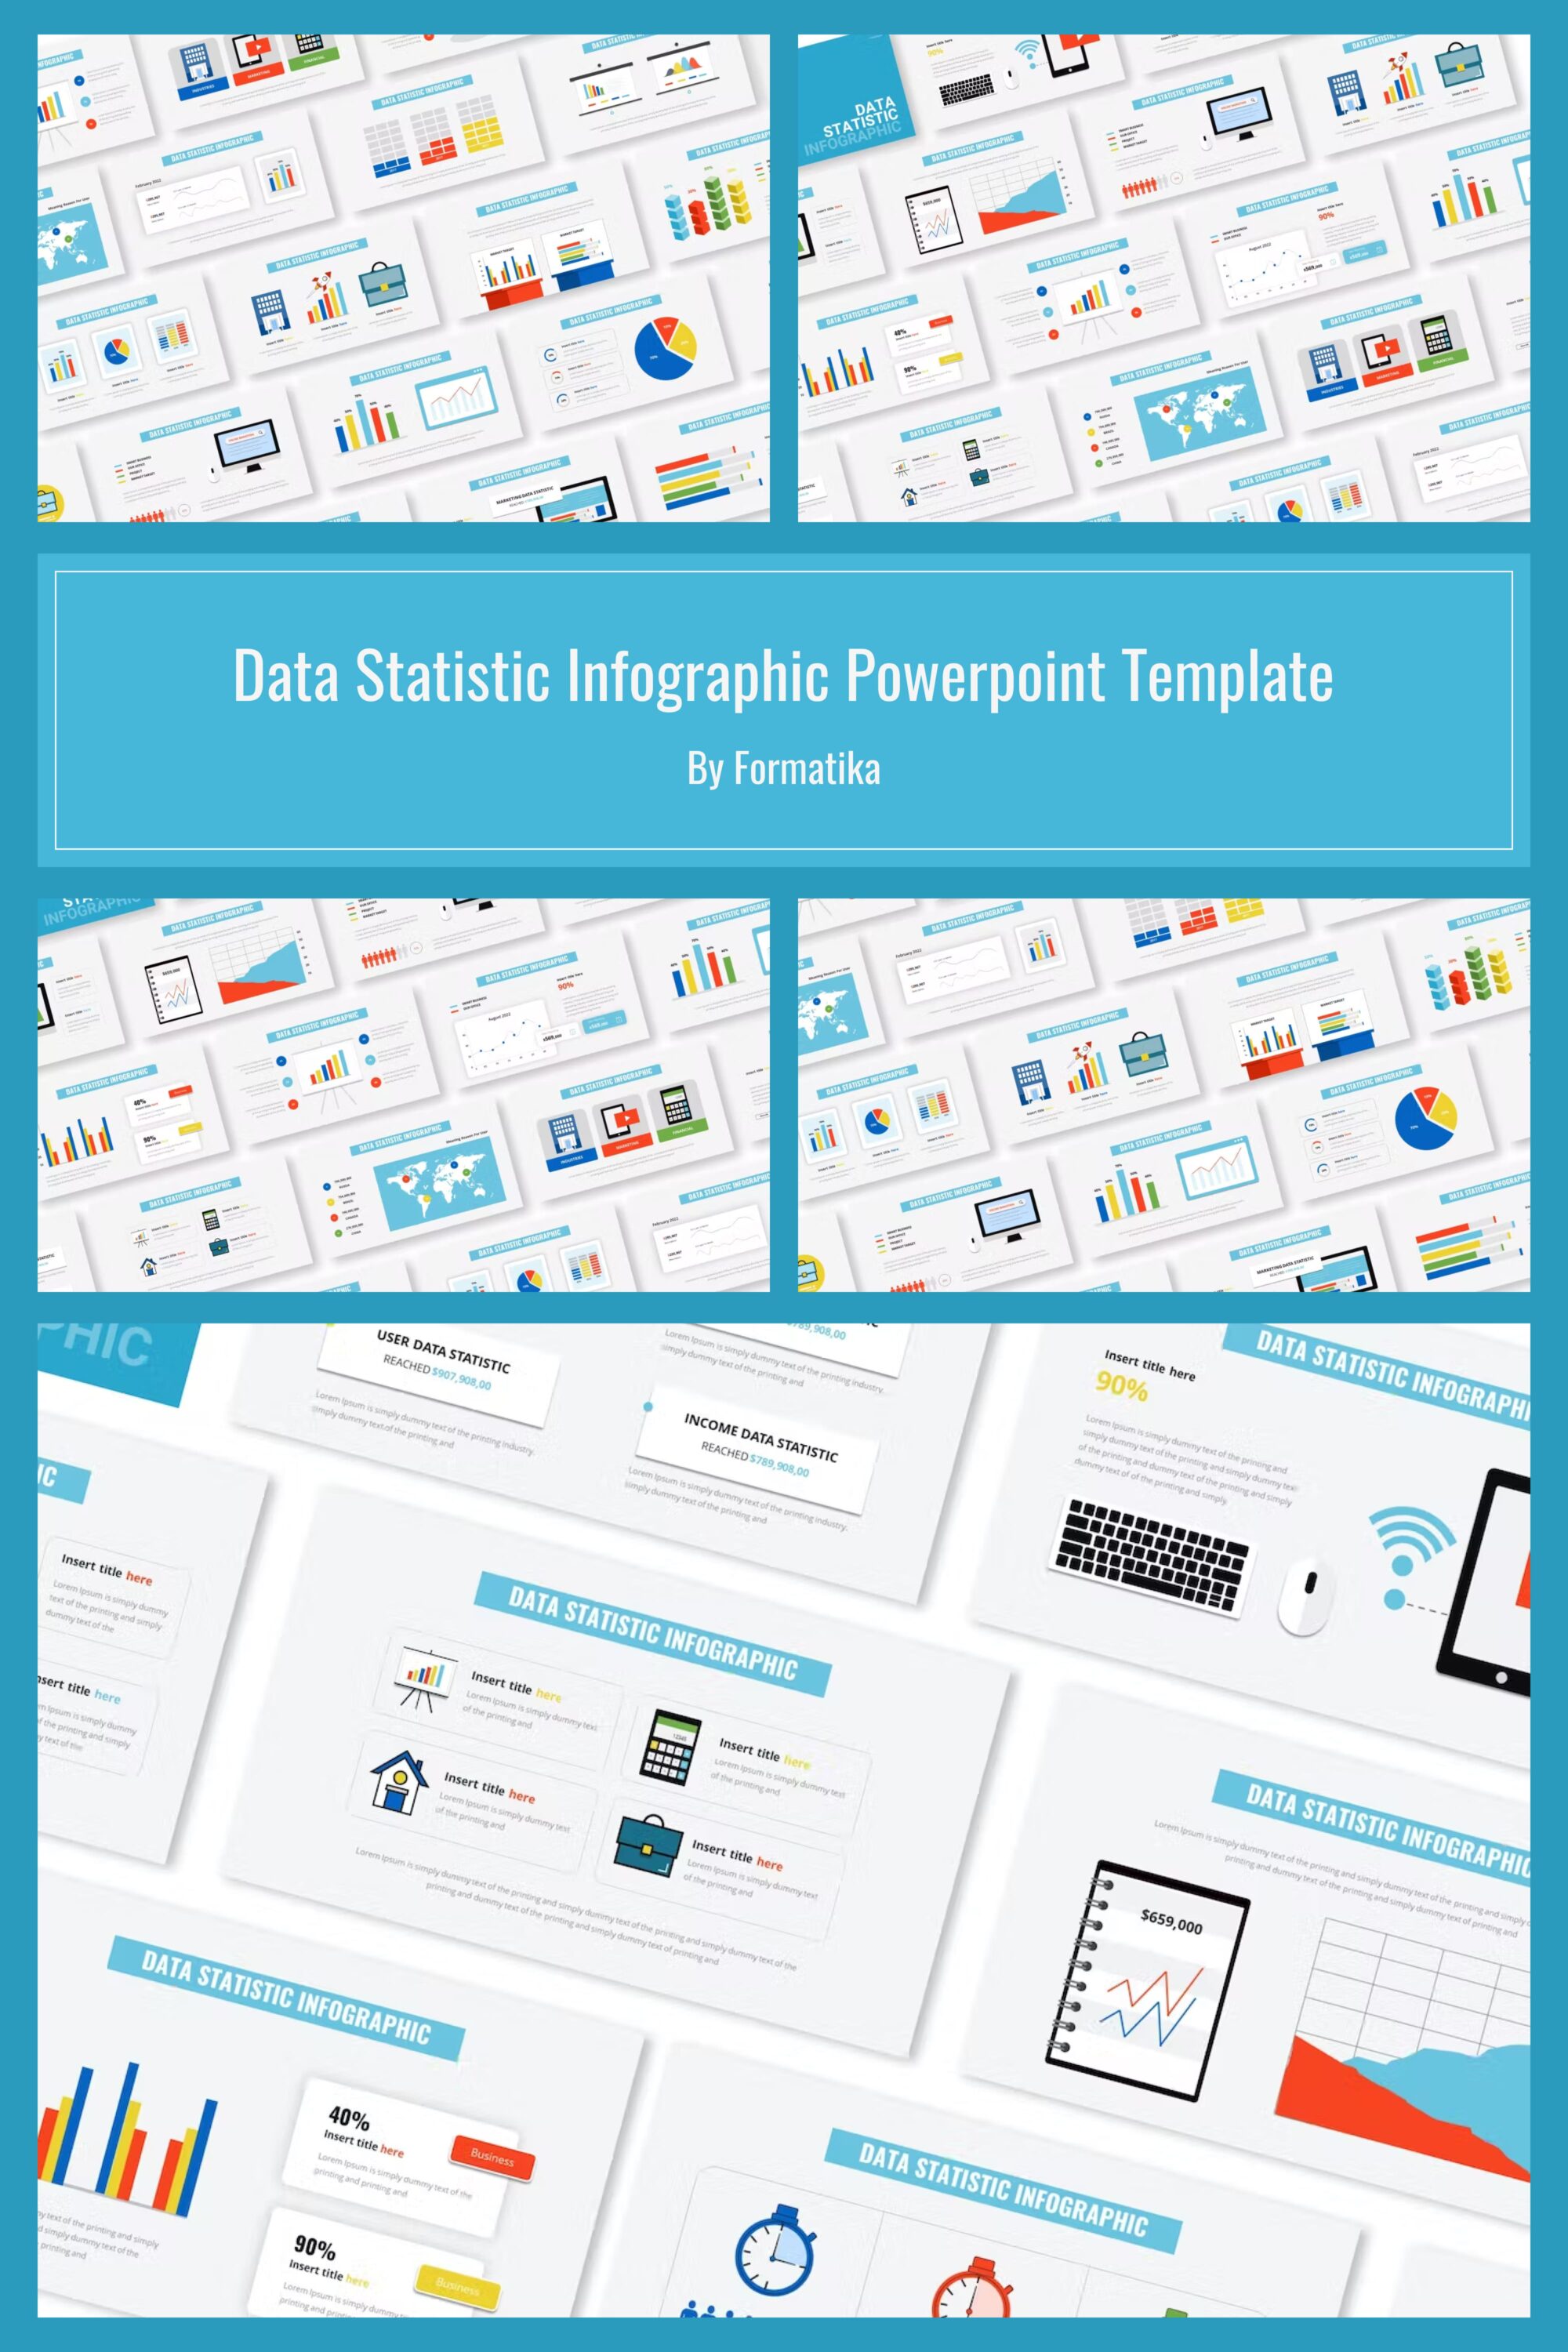 Data Statistic Infographic Powerpoint Template - pinterest image preview.